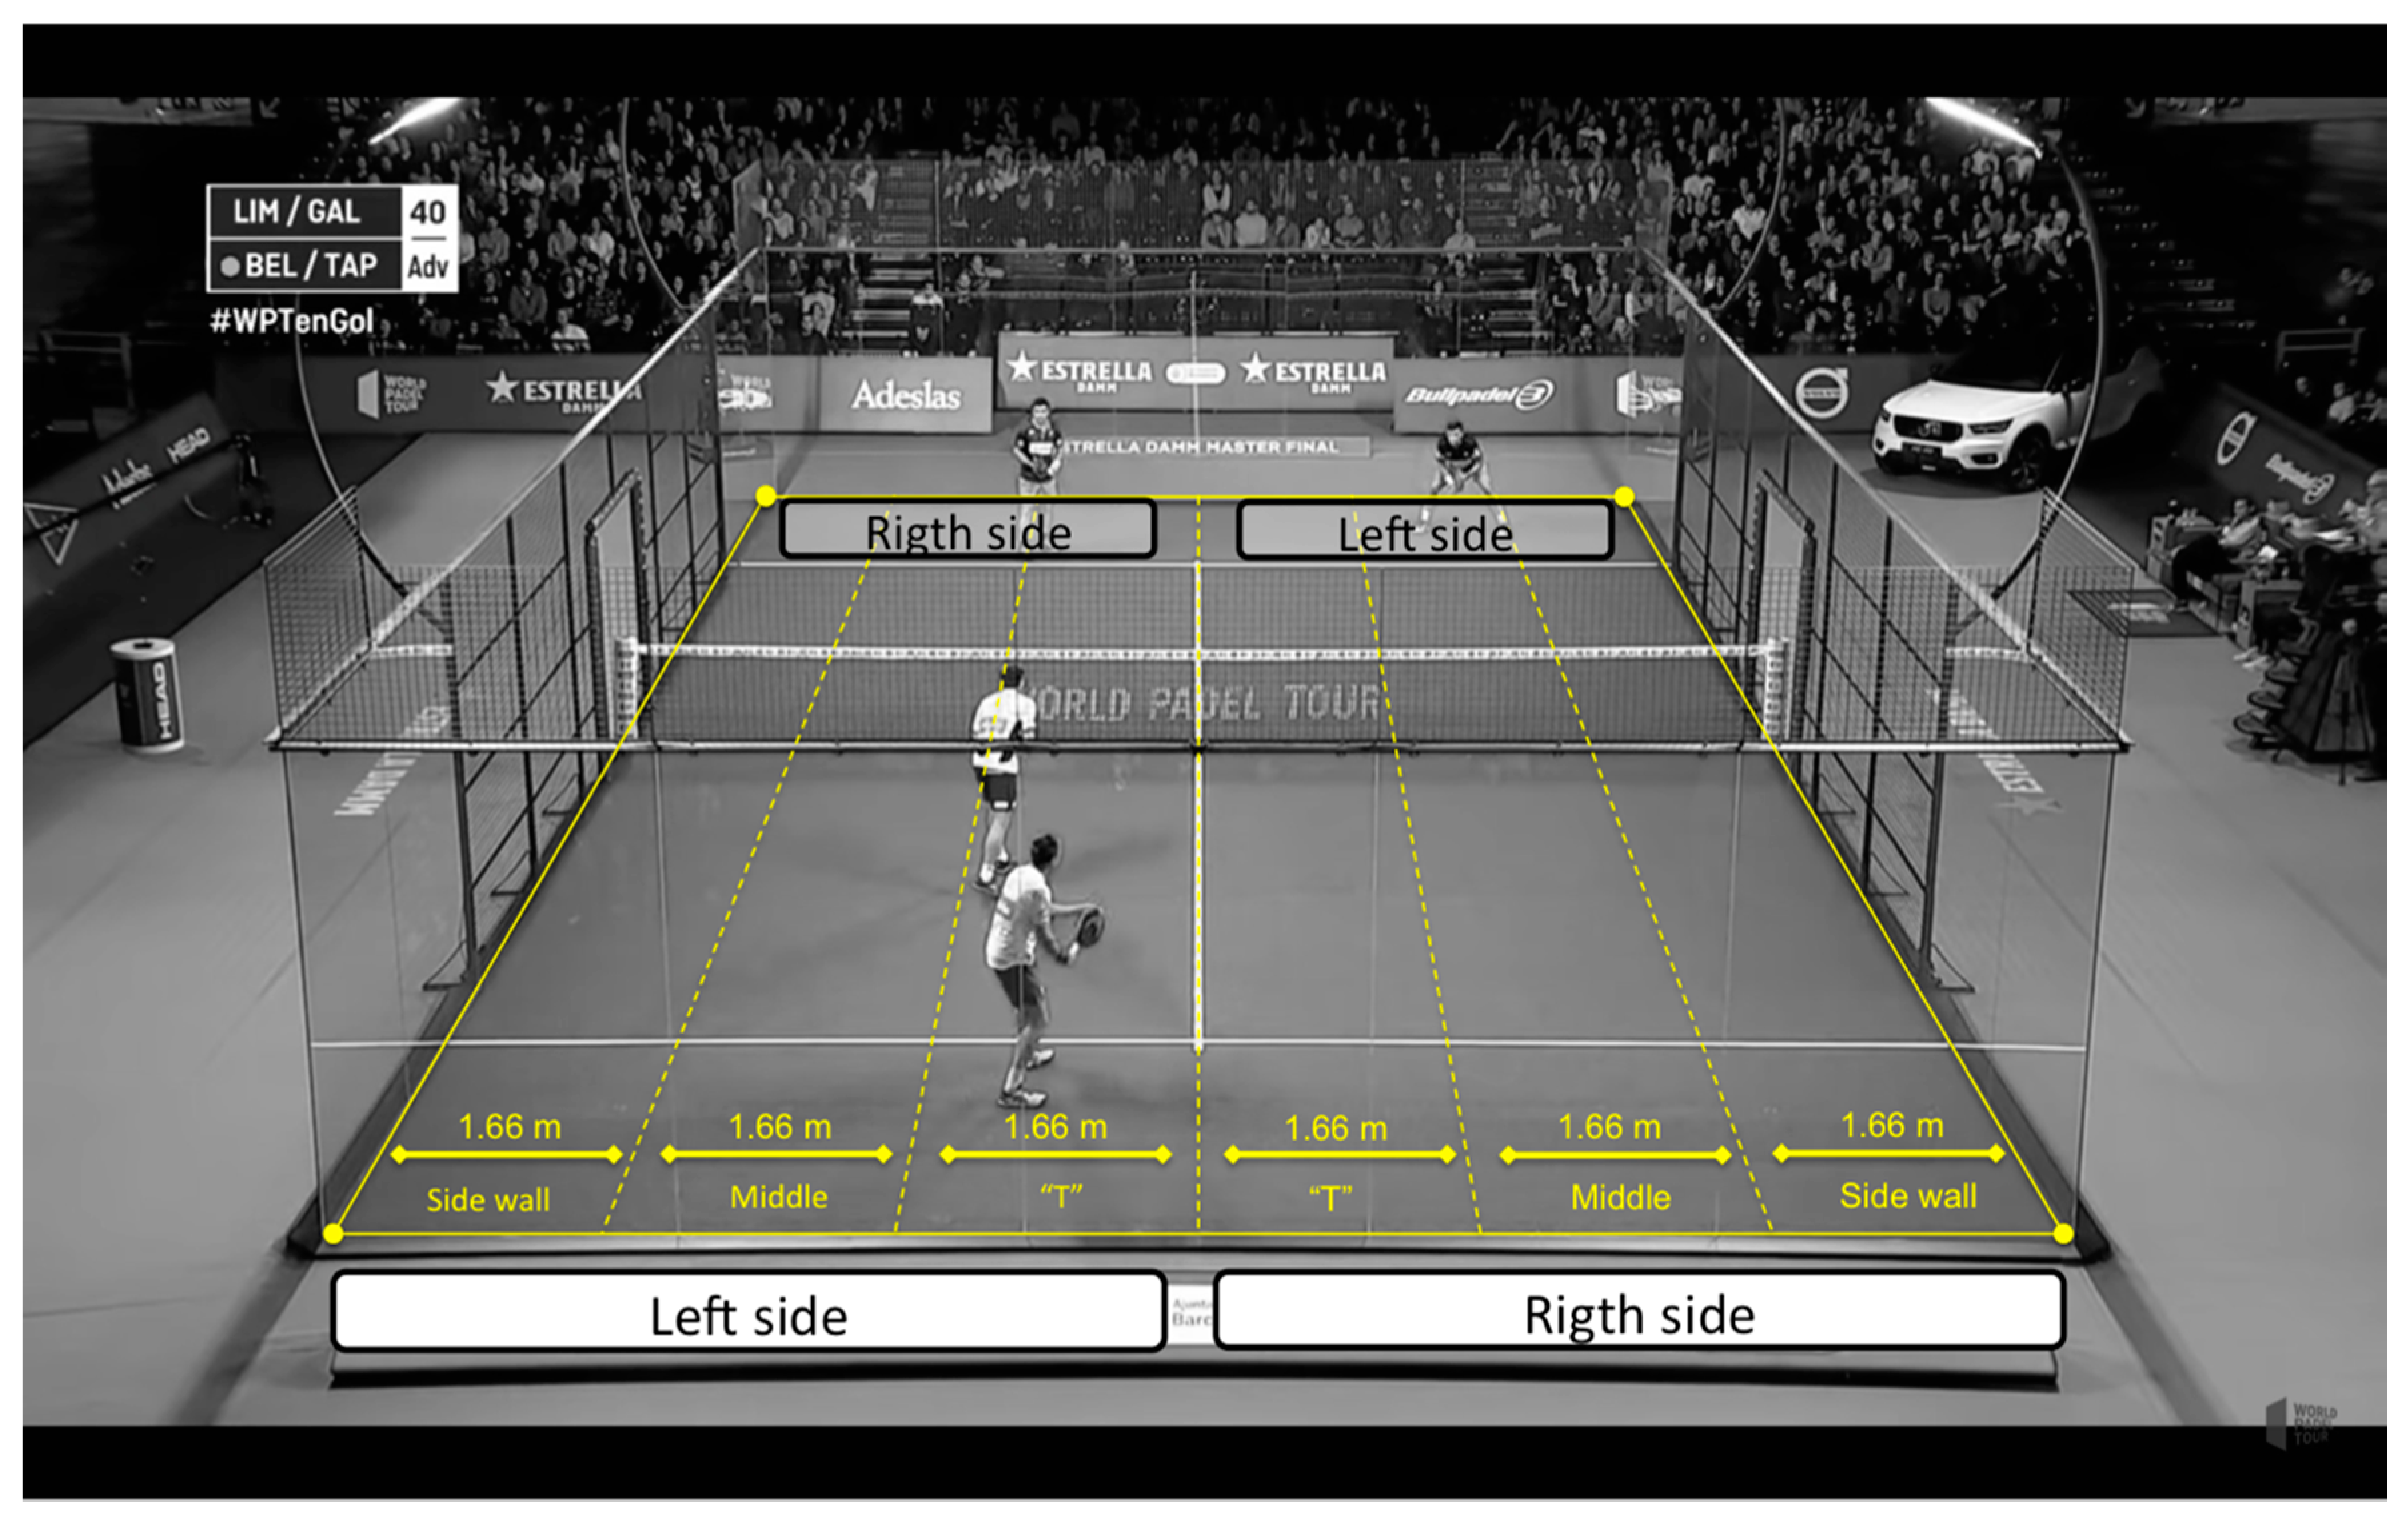 How to Keep Score in Padel